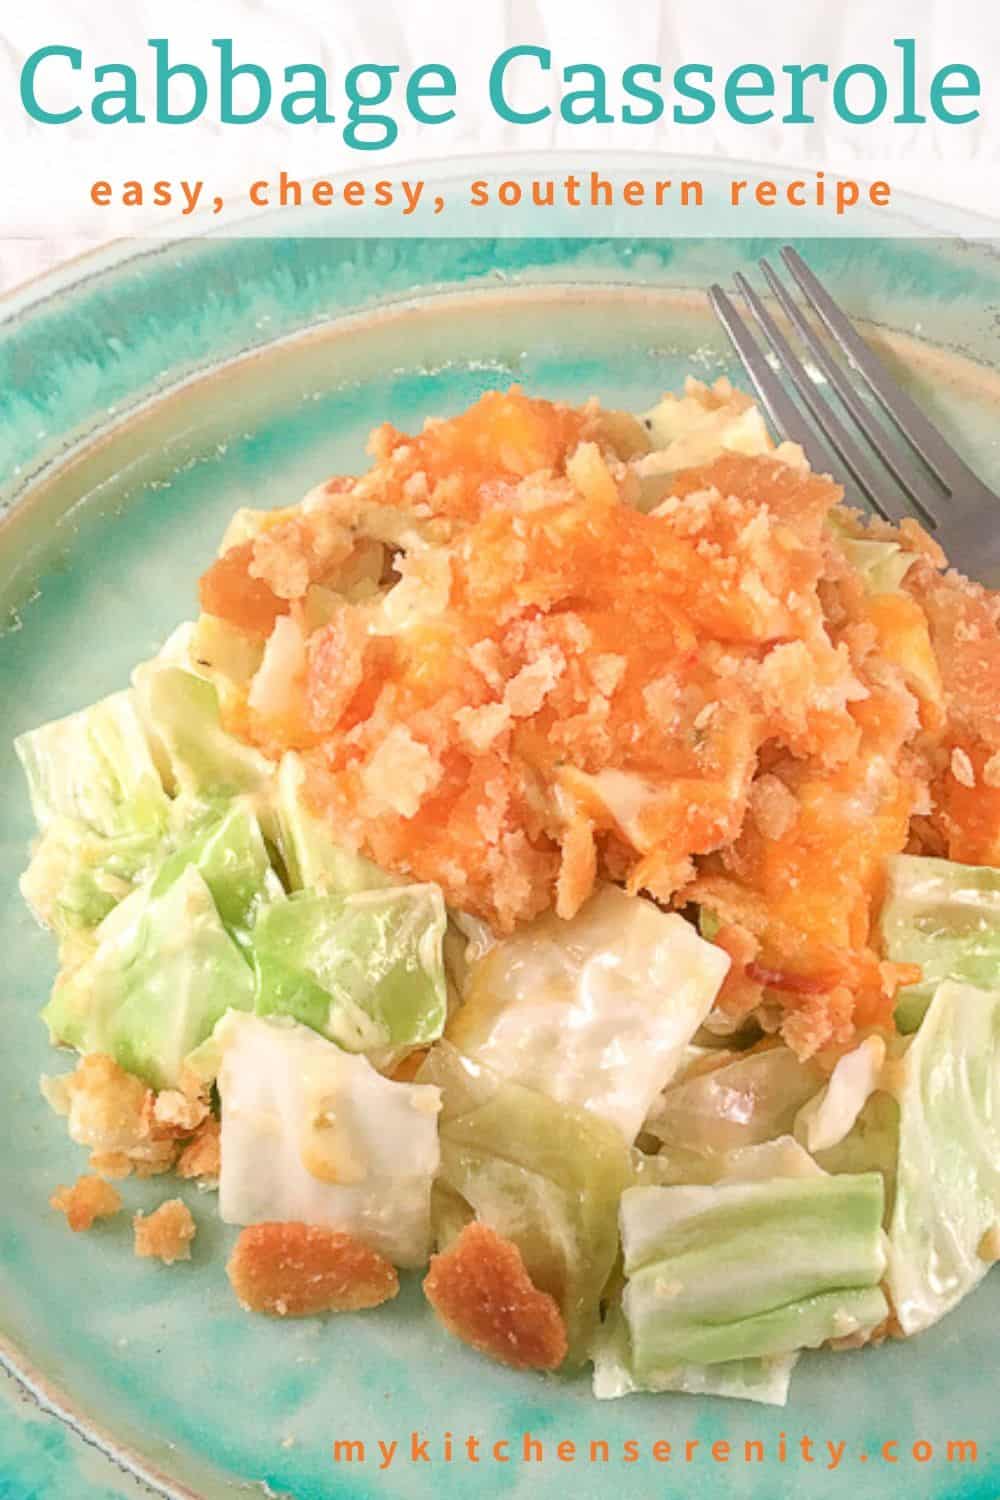 Cabbage Casserole on blue plate with fork